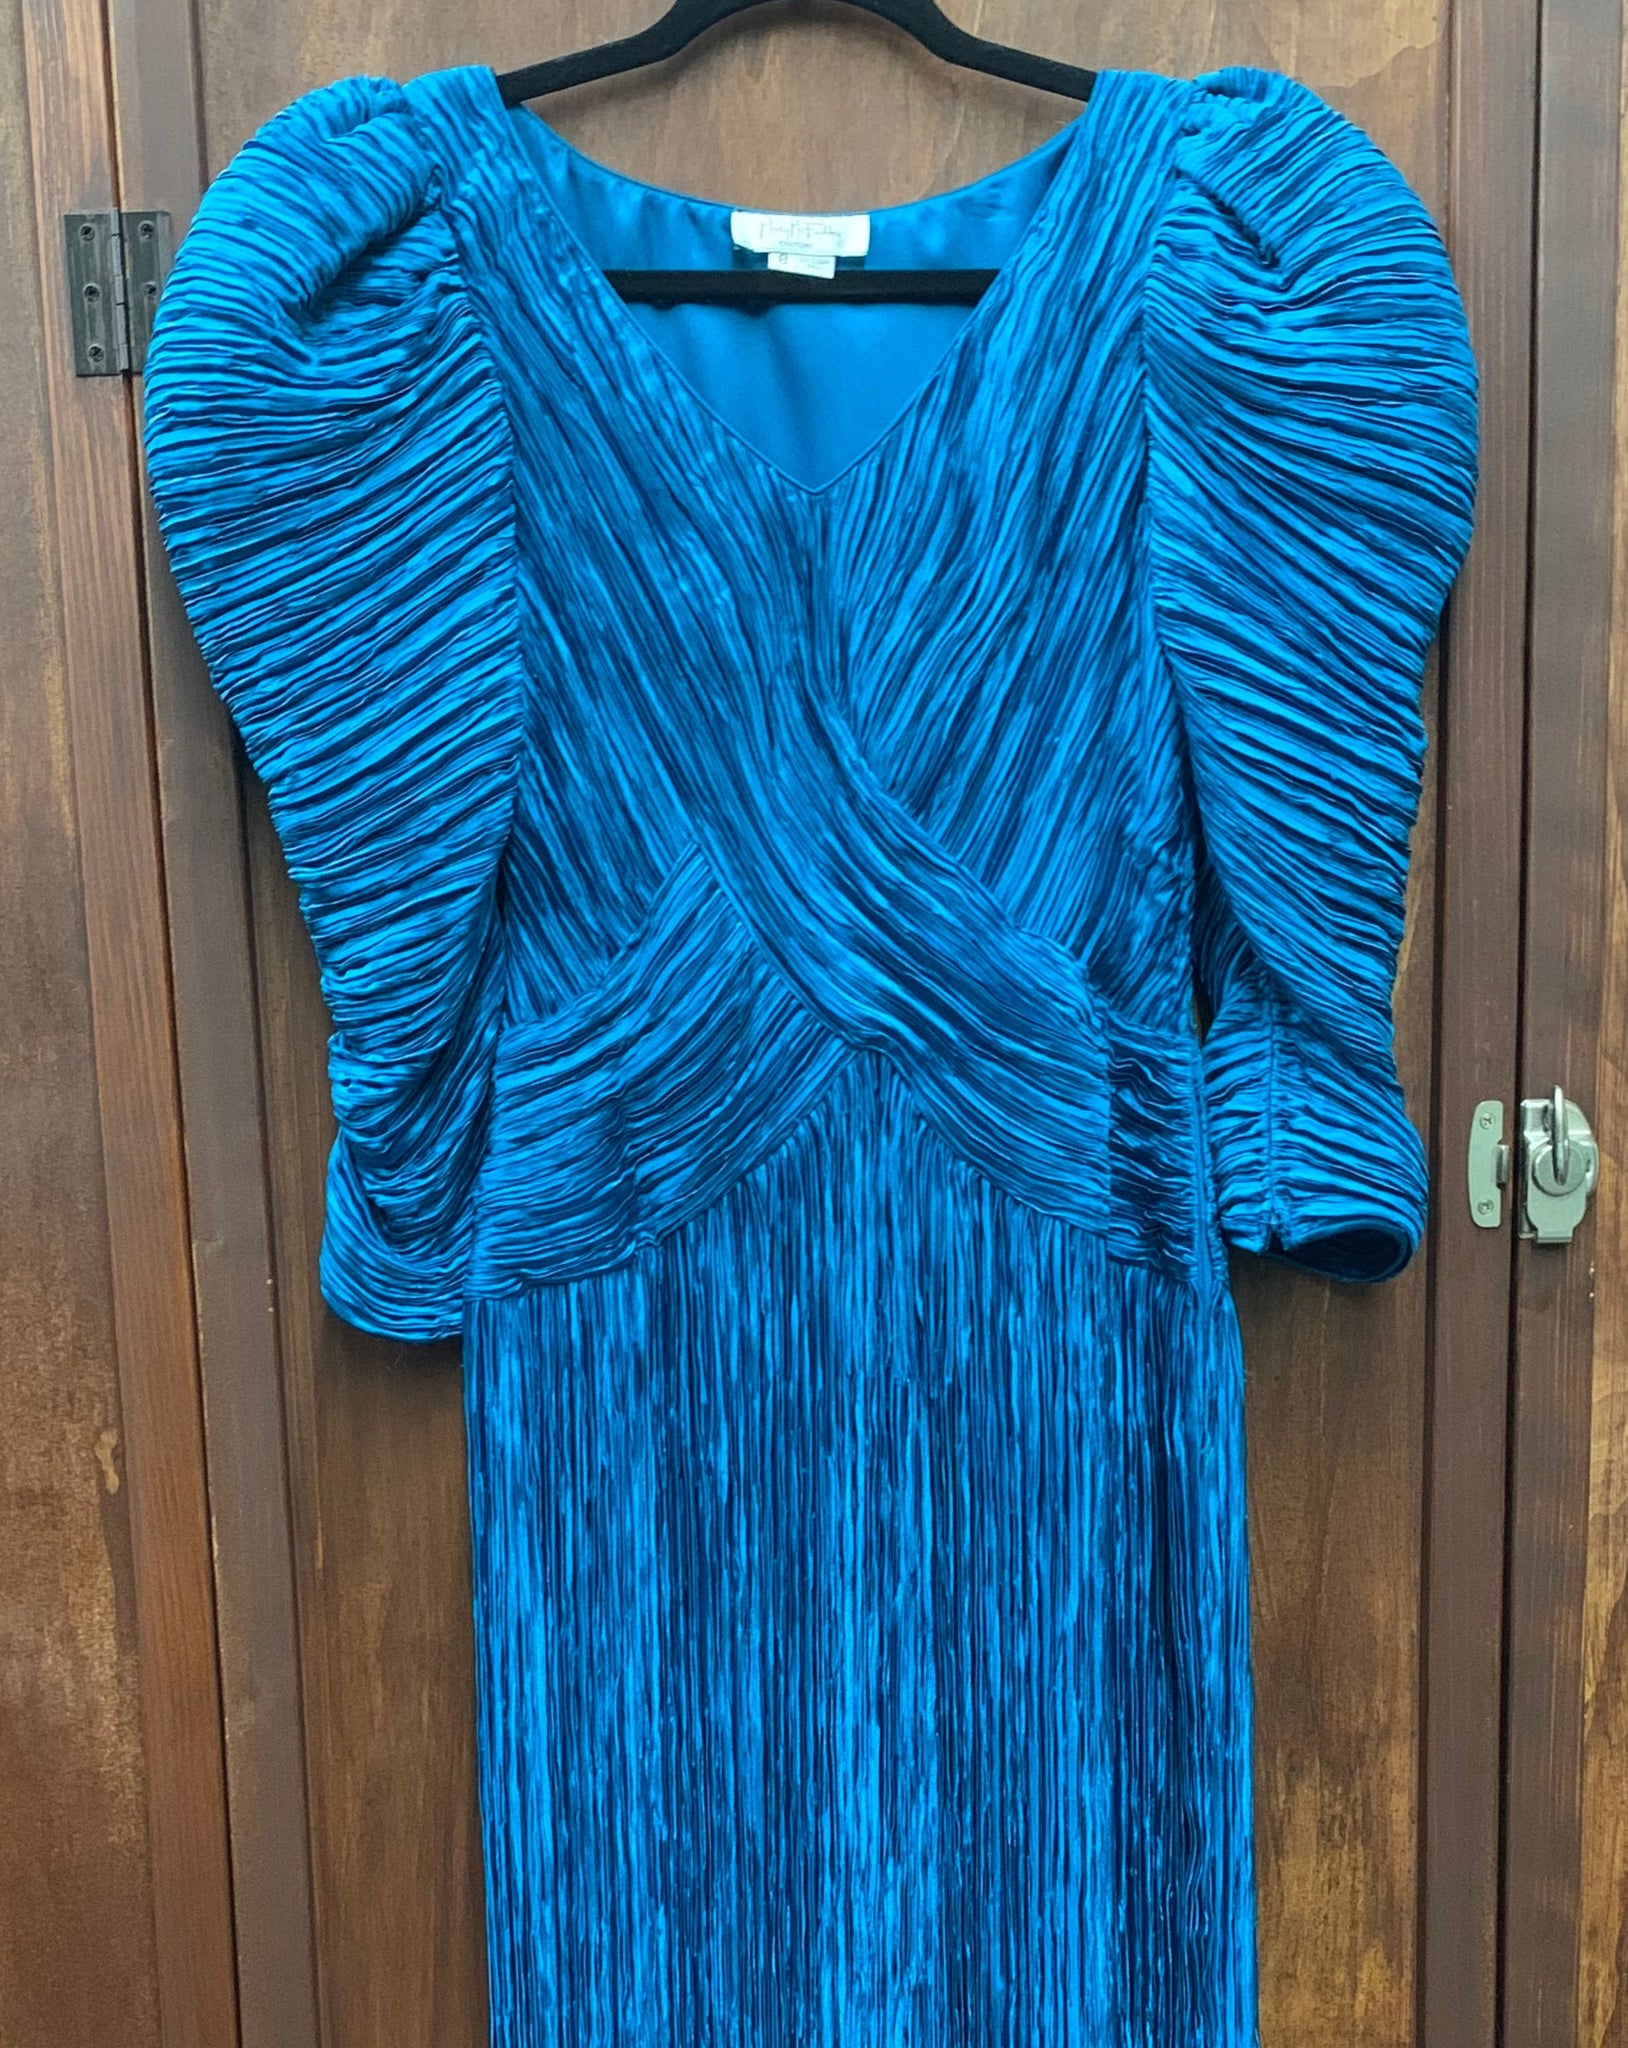 RENTAL 1980s DRESS- Mary McFadden Teal pleated gown